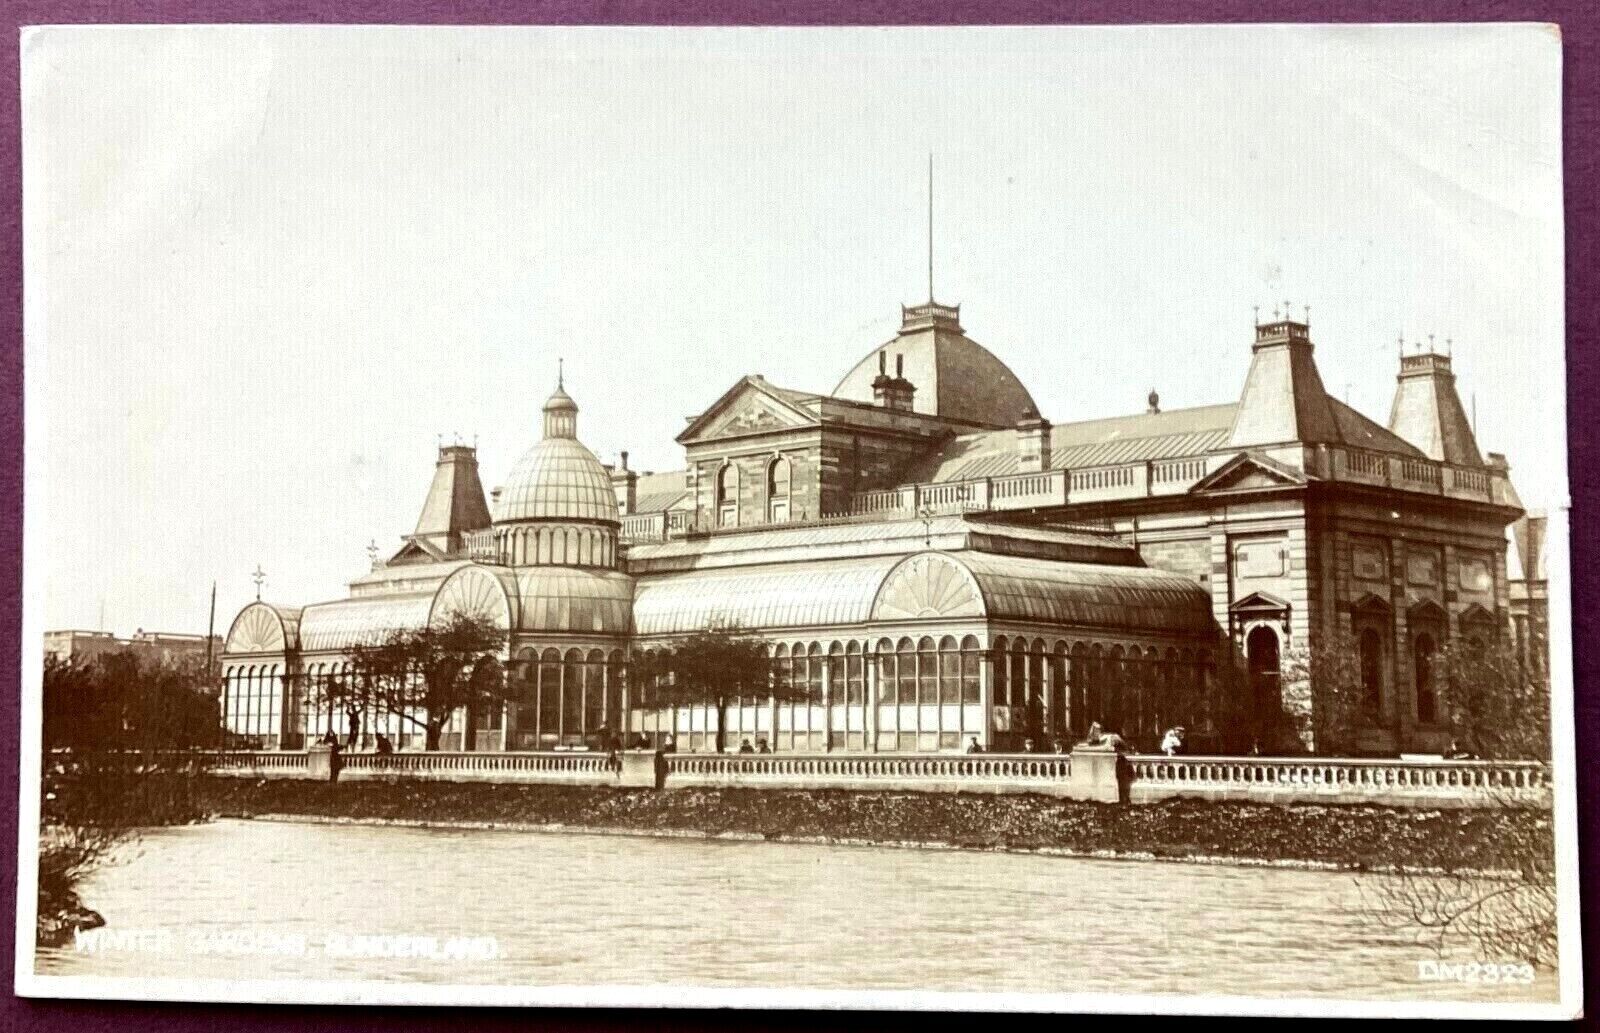 House Clearance - REAL PHOTO POSTCARD - THE WINTER GARDENS, SUNDERLAND, CO. DURHAM